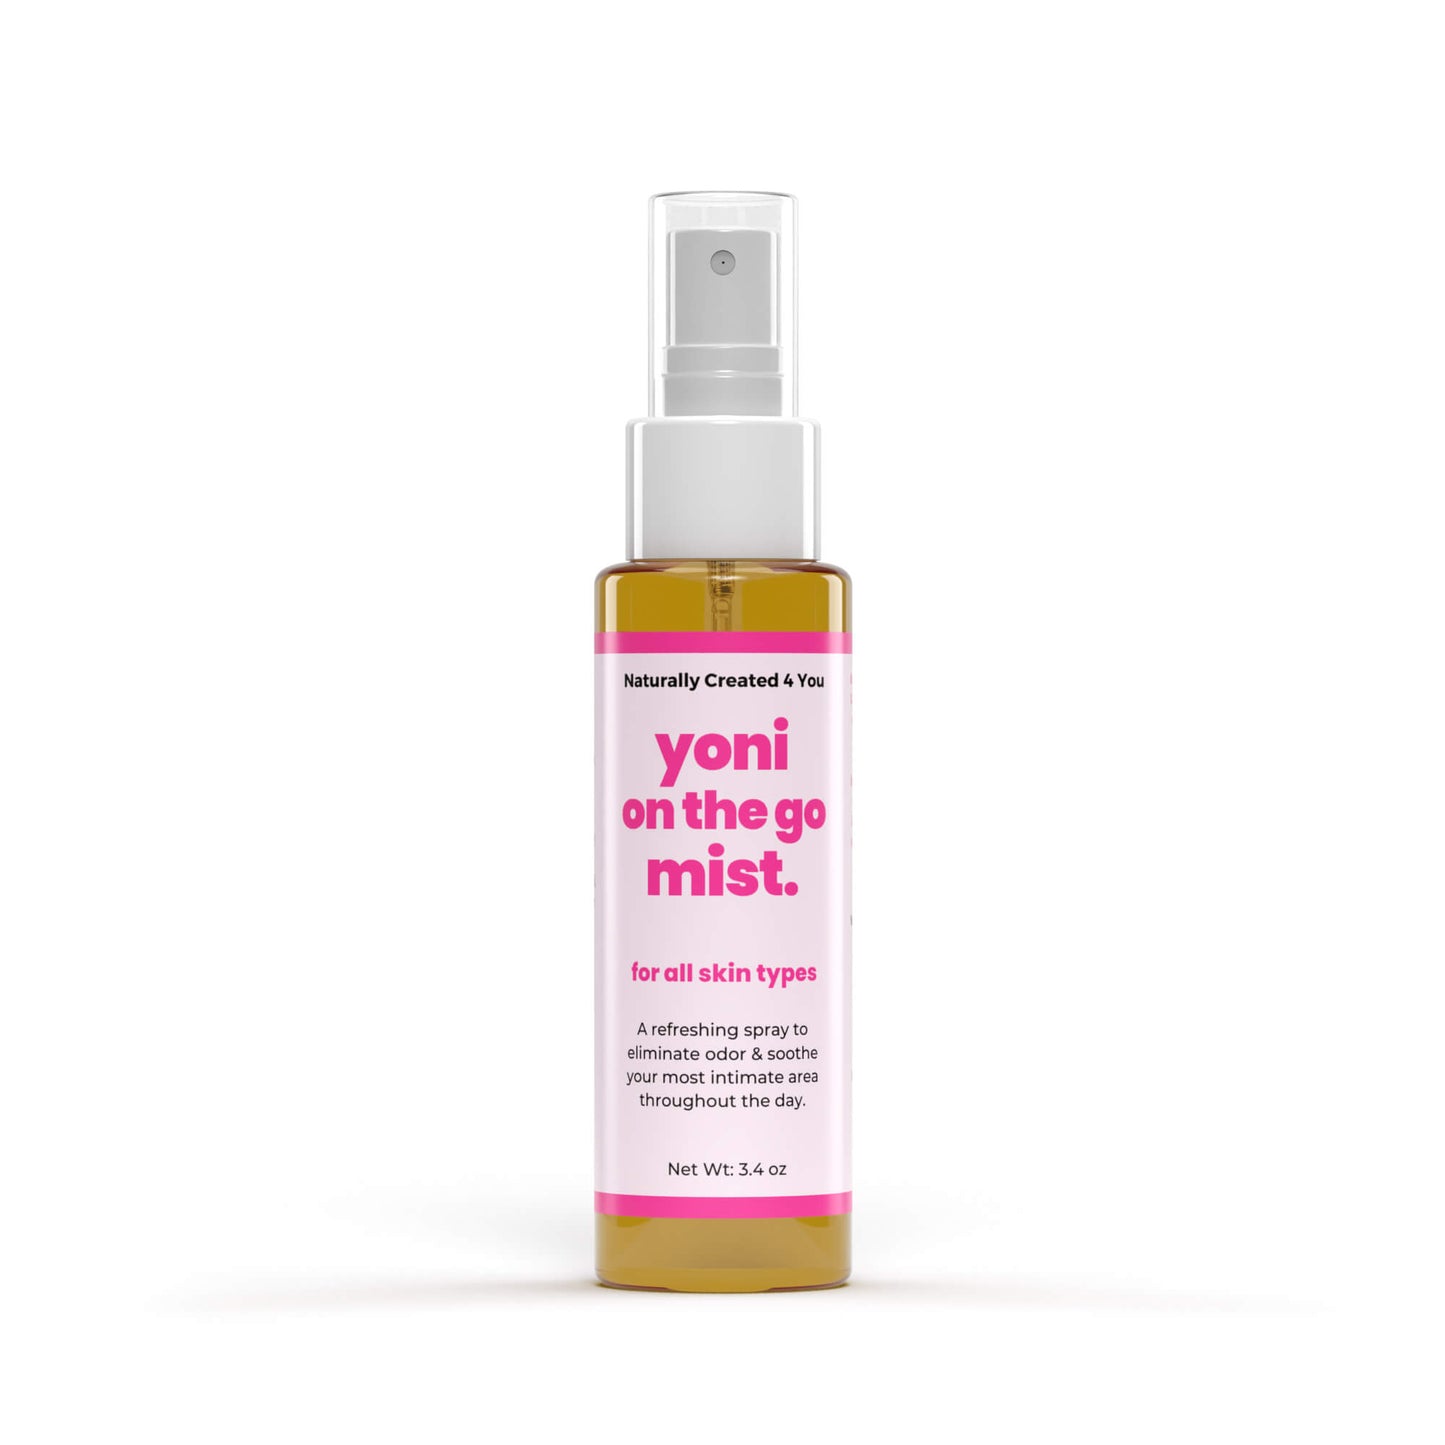 yoni on the go mist